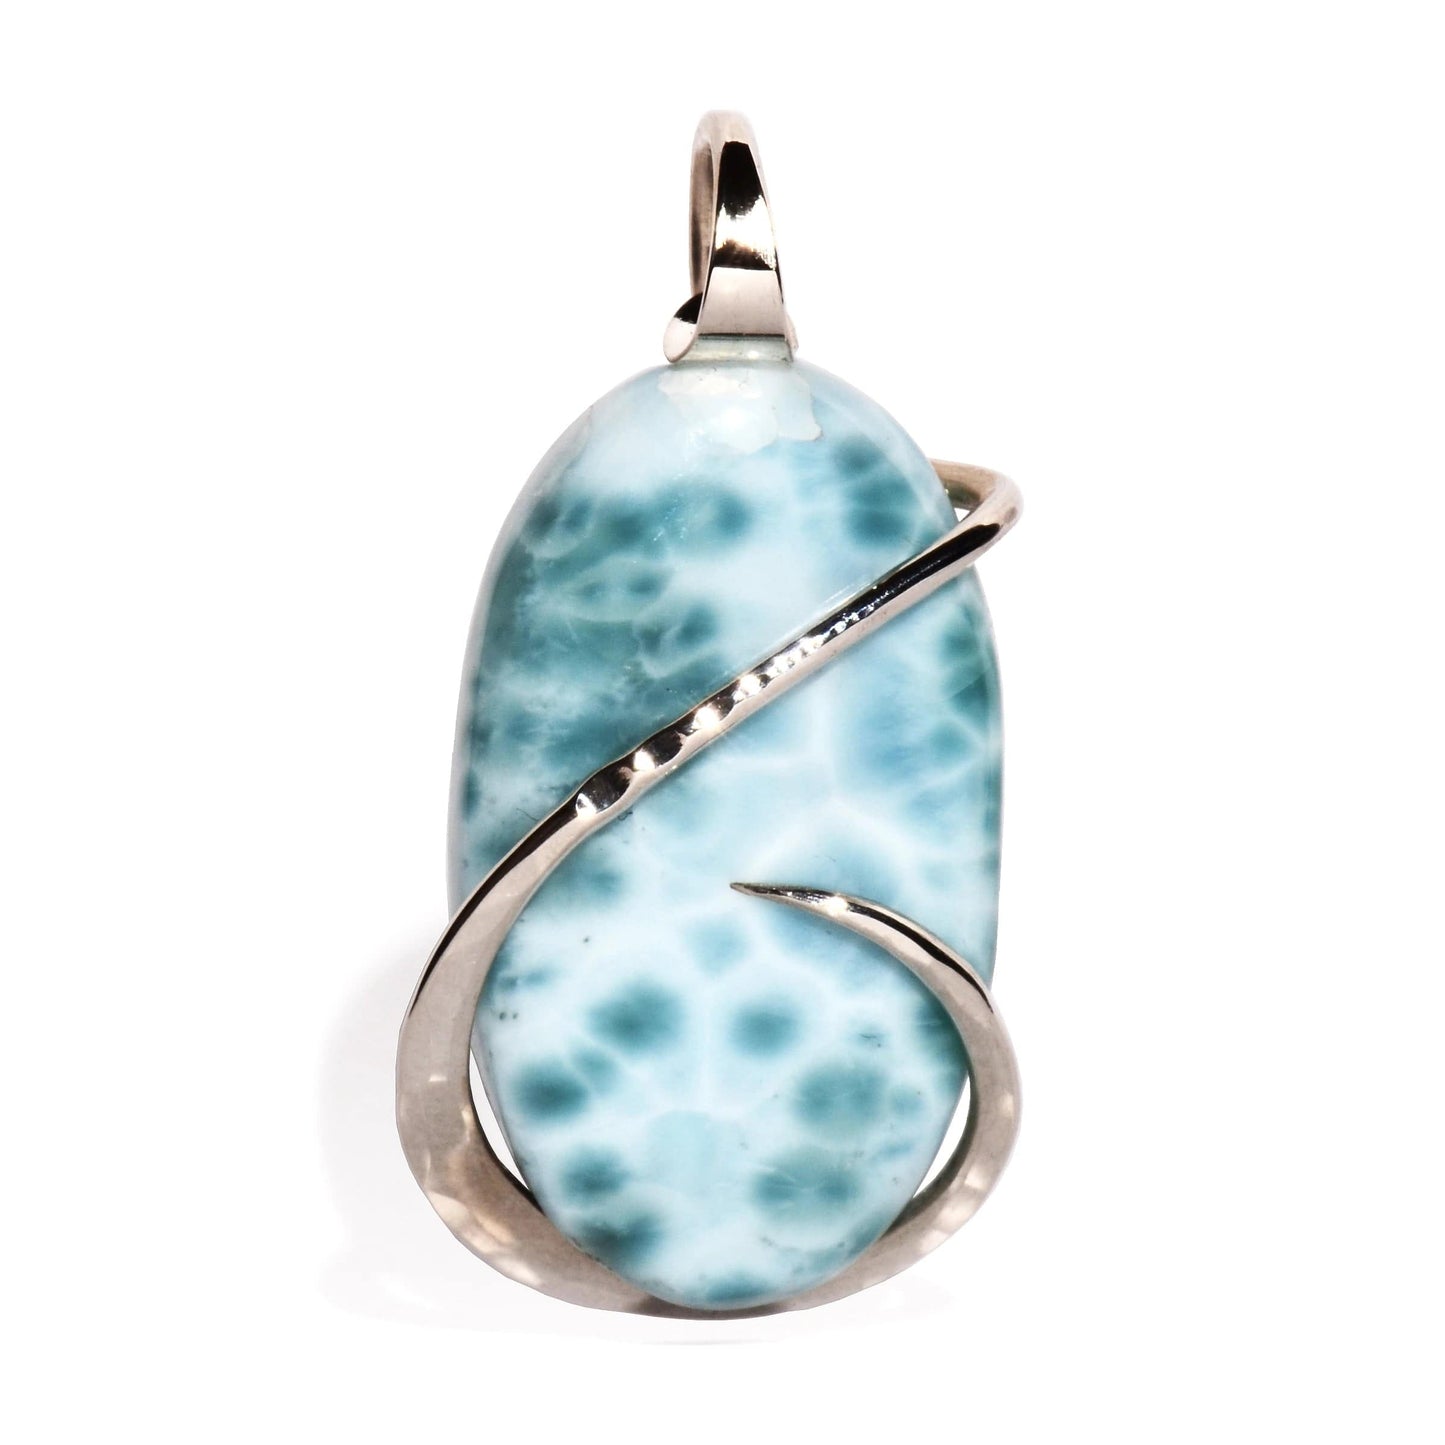 Buy Larimar for the stone of calm communication.